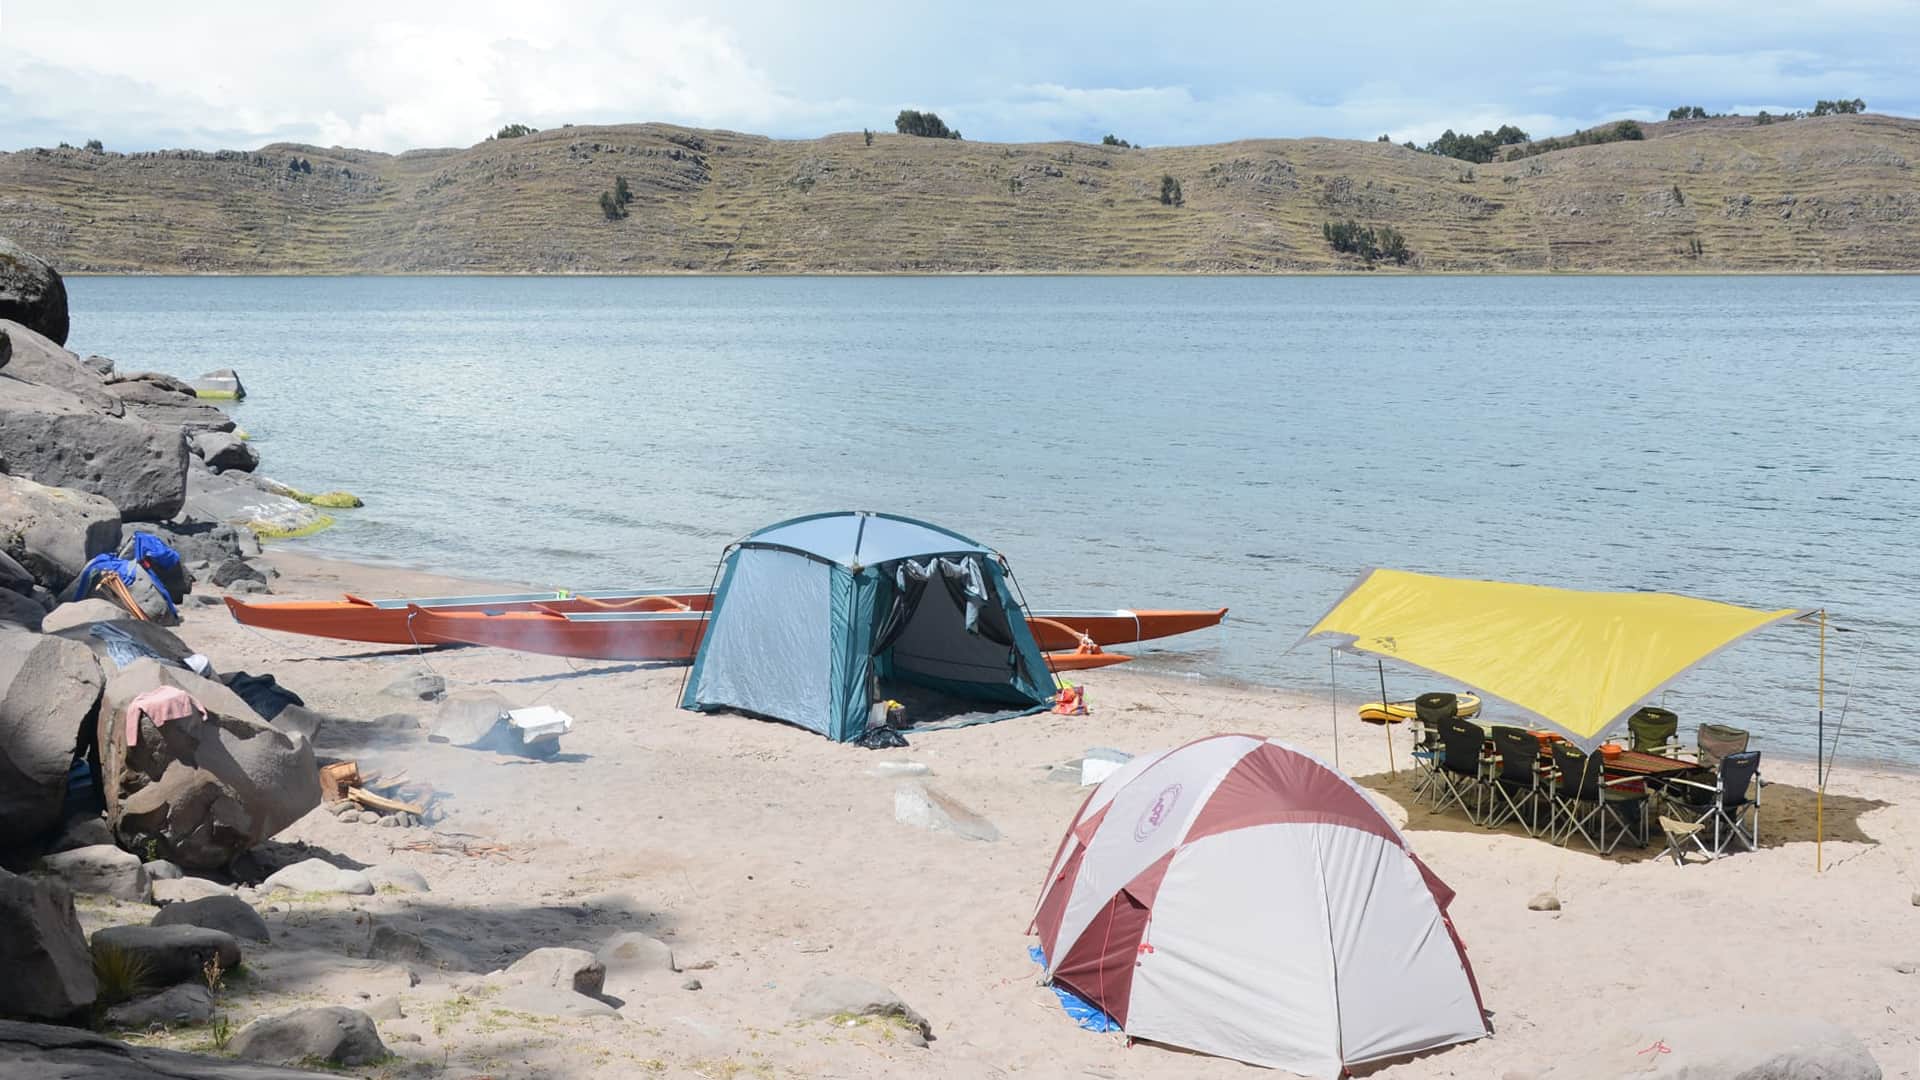 11Paramis camping site with tents at the beach